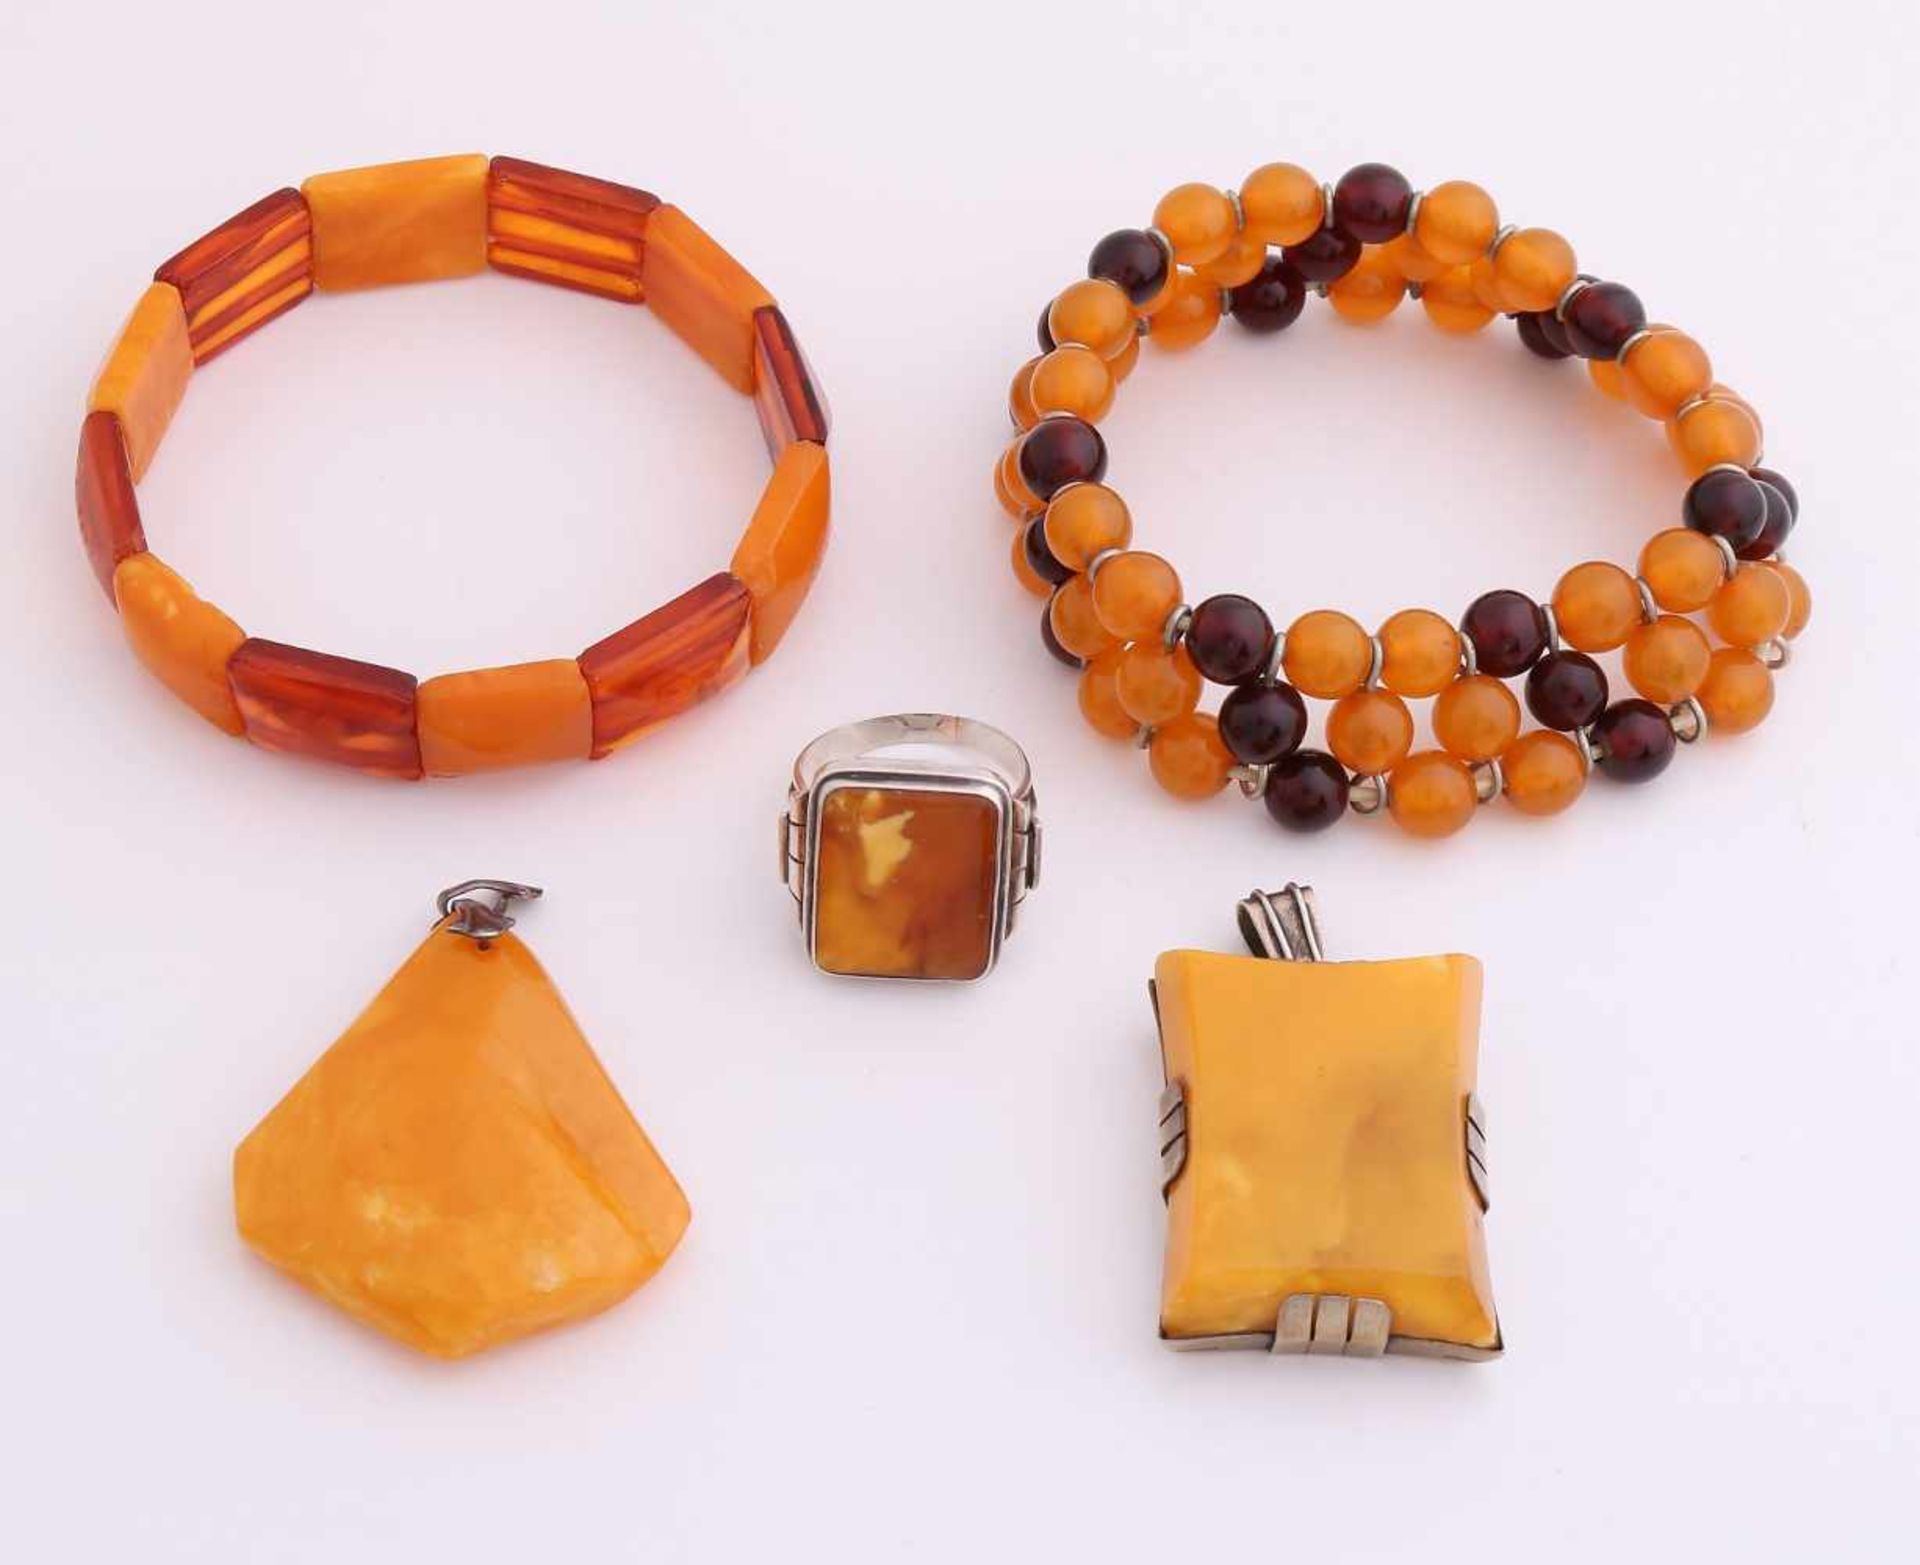 Lot 5 of jewelery with amber, two bracelets from elastic with succinic beads, pendants with 2